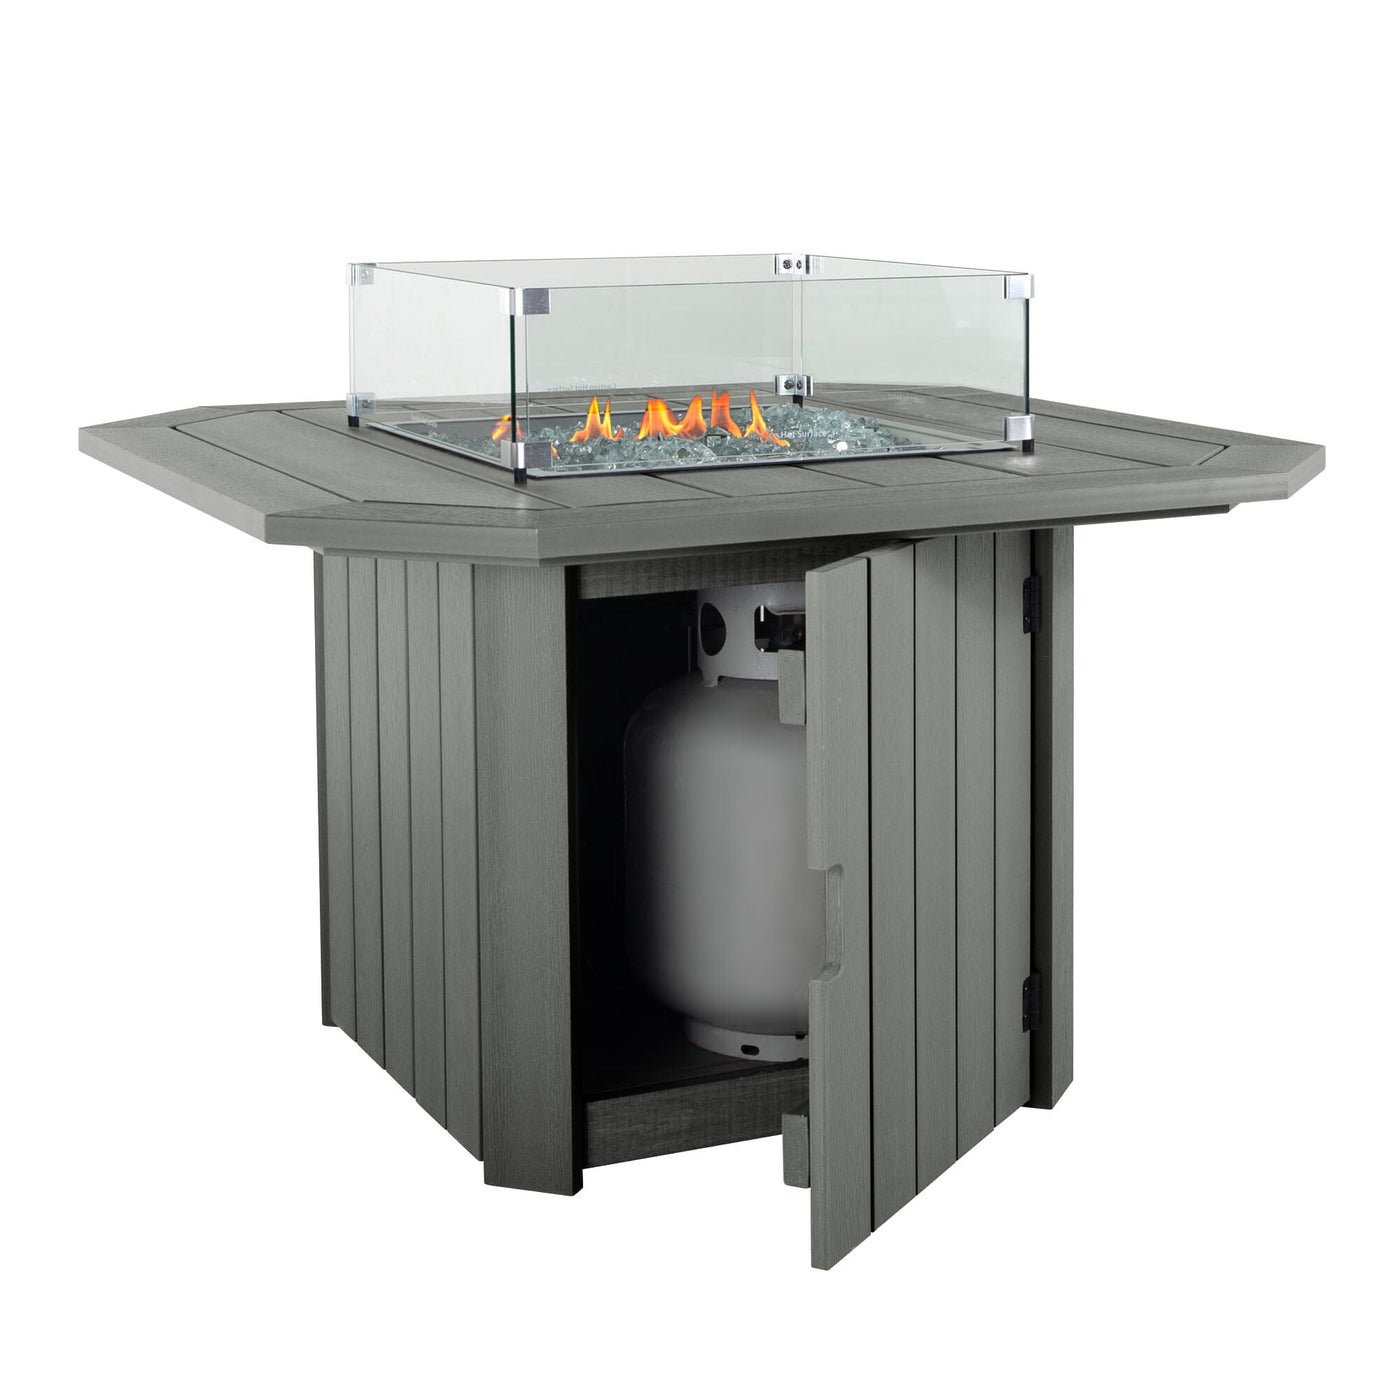 Gray Oasis Fire table with propane tank in view